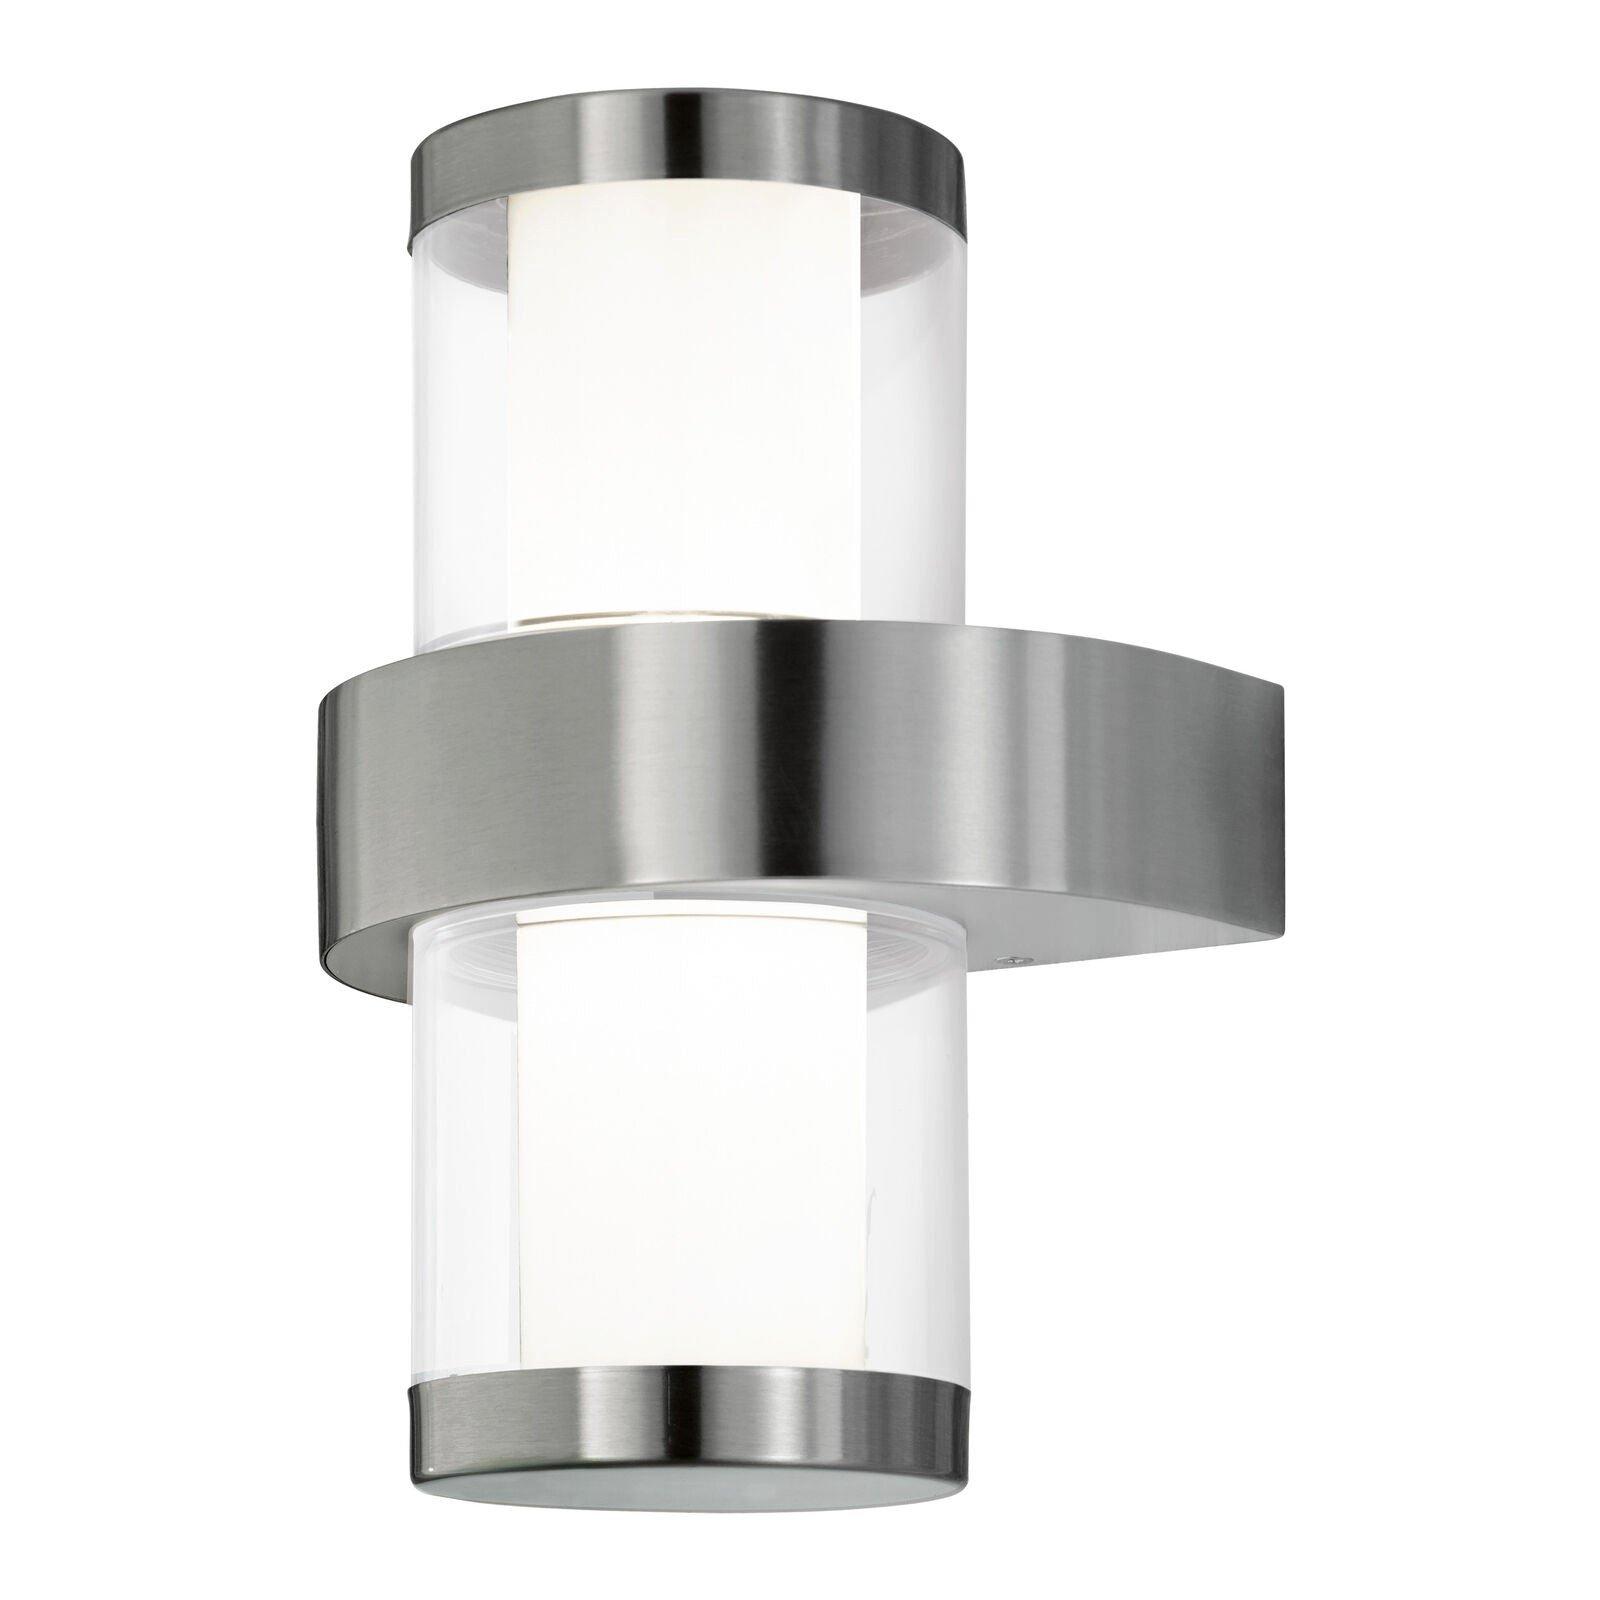 IP44 Outdoor Wall Light Stainless Steel & Glass 3.7W Built in LED Porch Lamp